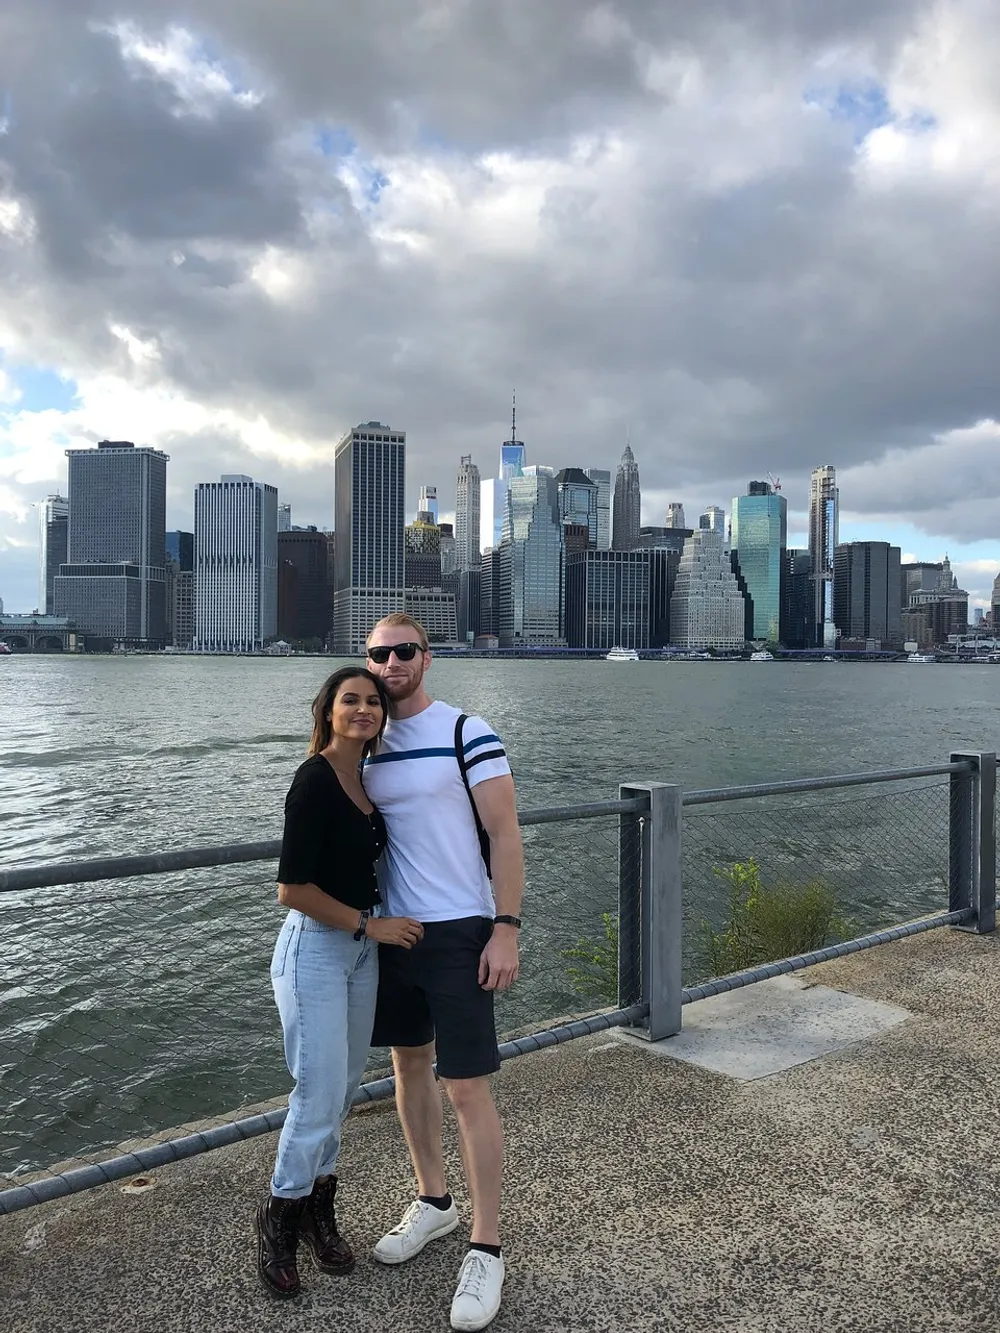 A couple is posing for a photo with the New York City skyline in the background